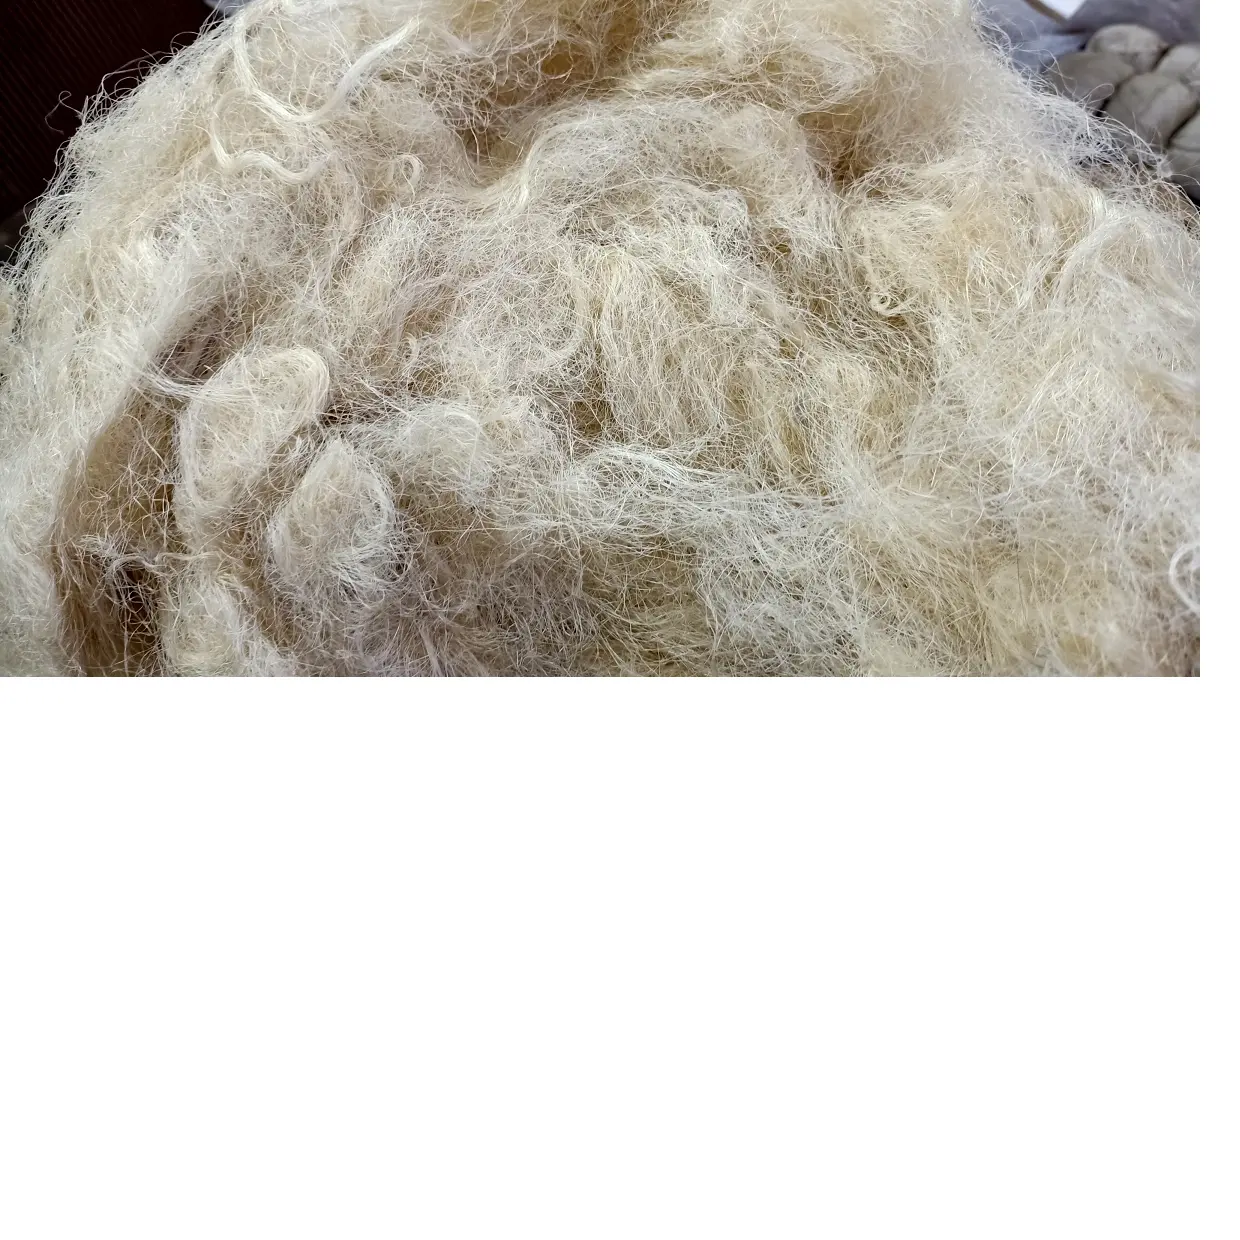 Silk Waste for Textile Artists, Spinners, Weavers and Art and Crafts